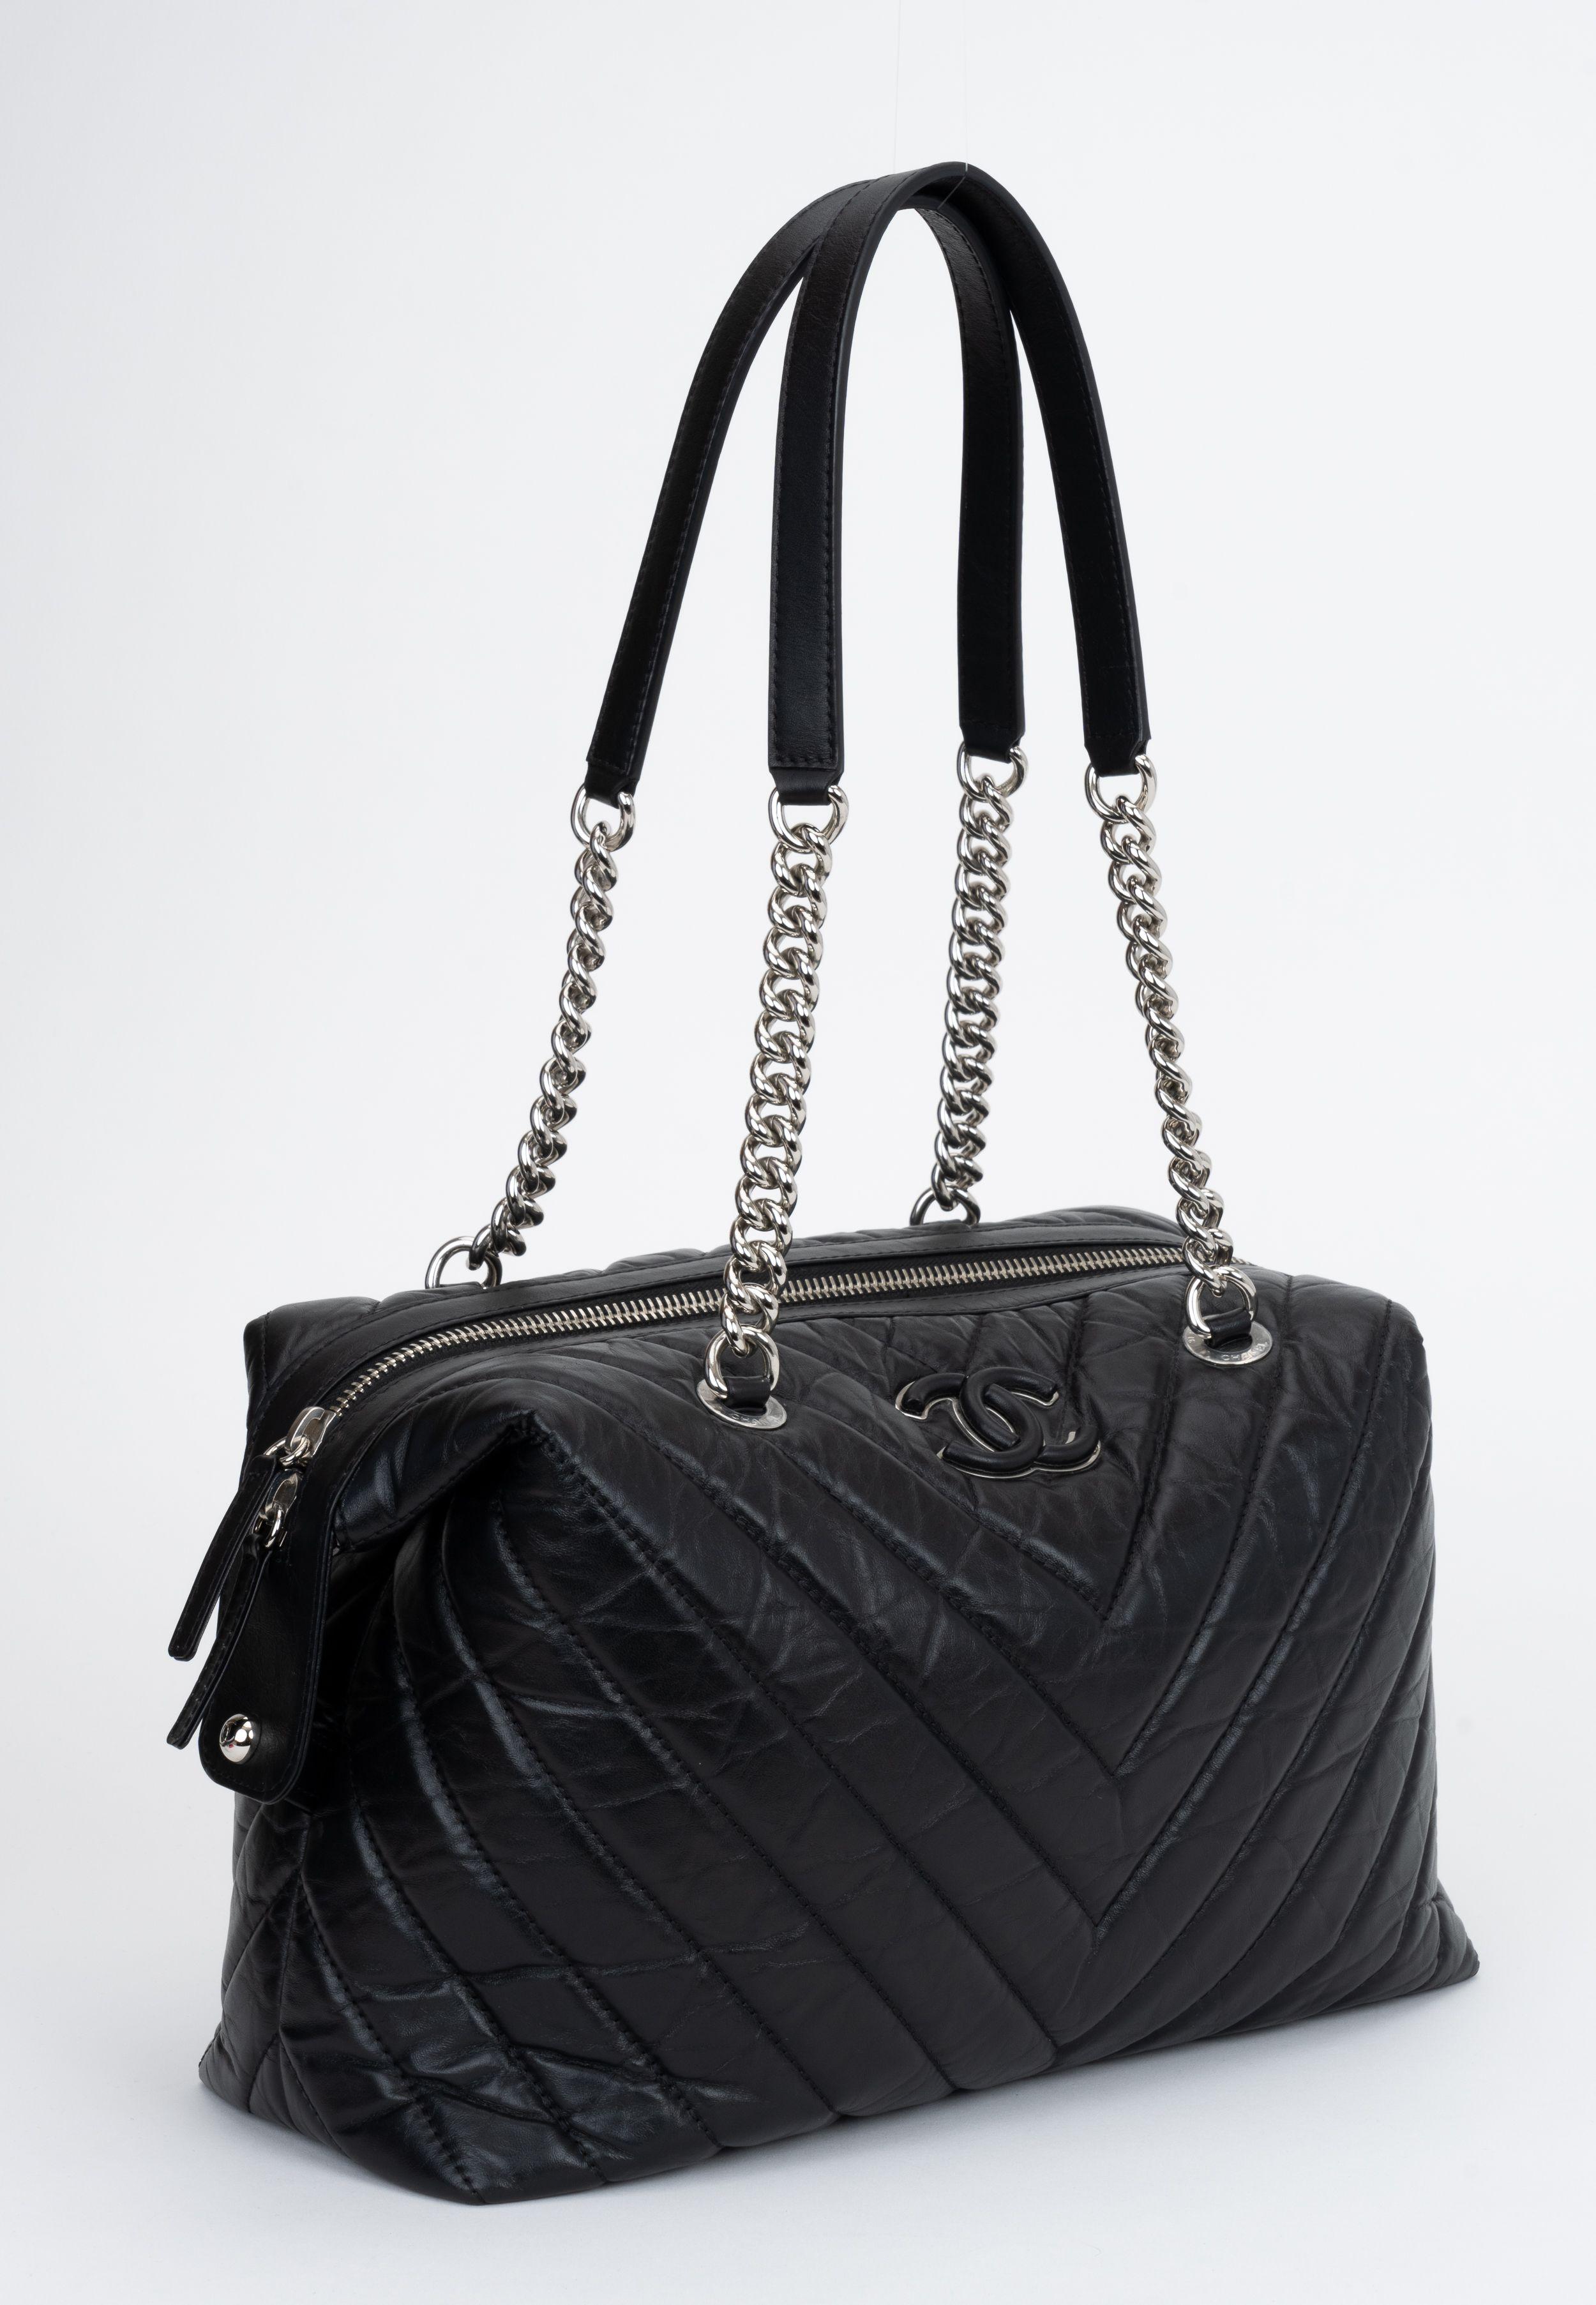 Chanel black chevron leather shoulder bag with double straps. Front cc covered logo. Collection 26. Shoulder drop 13